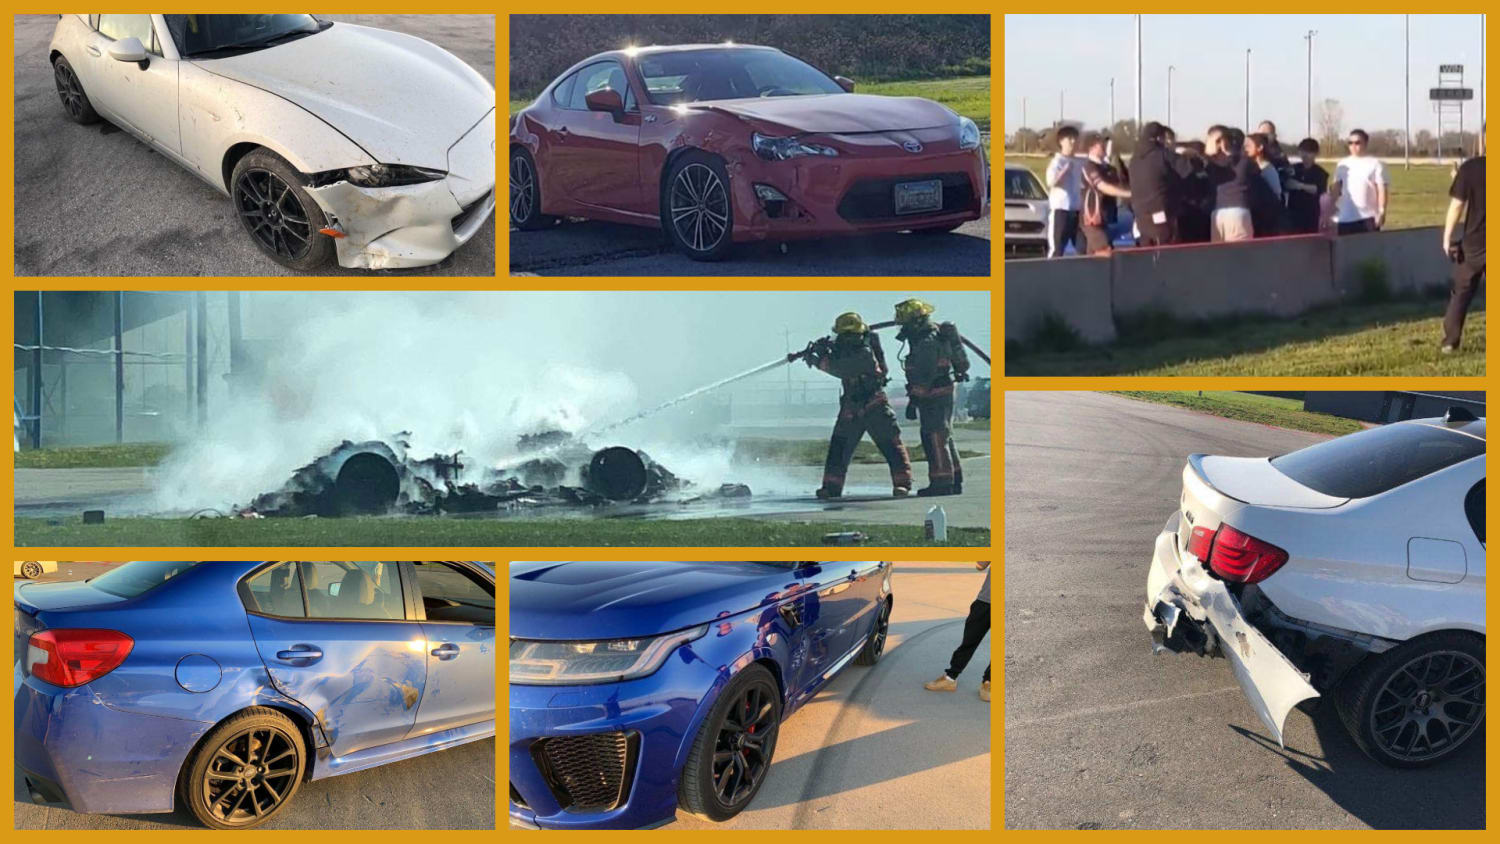 Toronto Motorsports Park's First Post-Lockdown Track Day Ends in Crashes, Punches, Fire